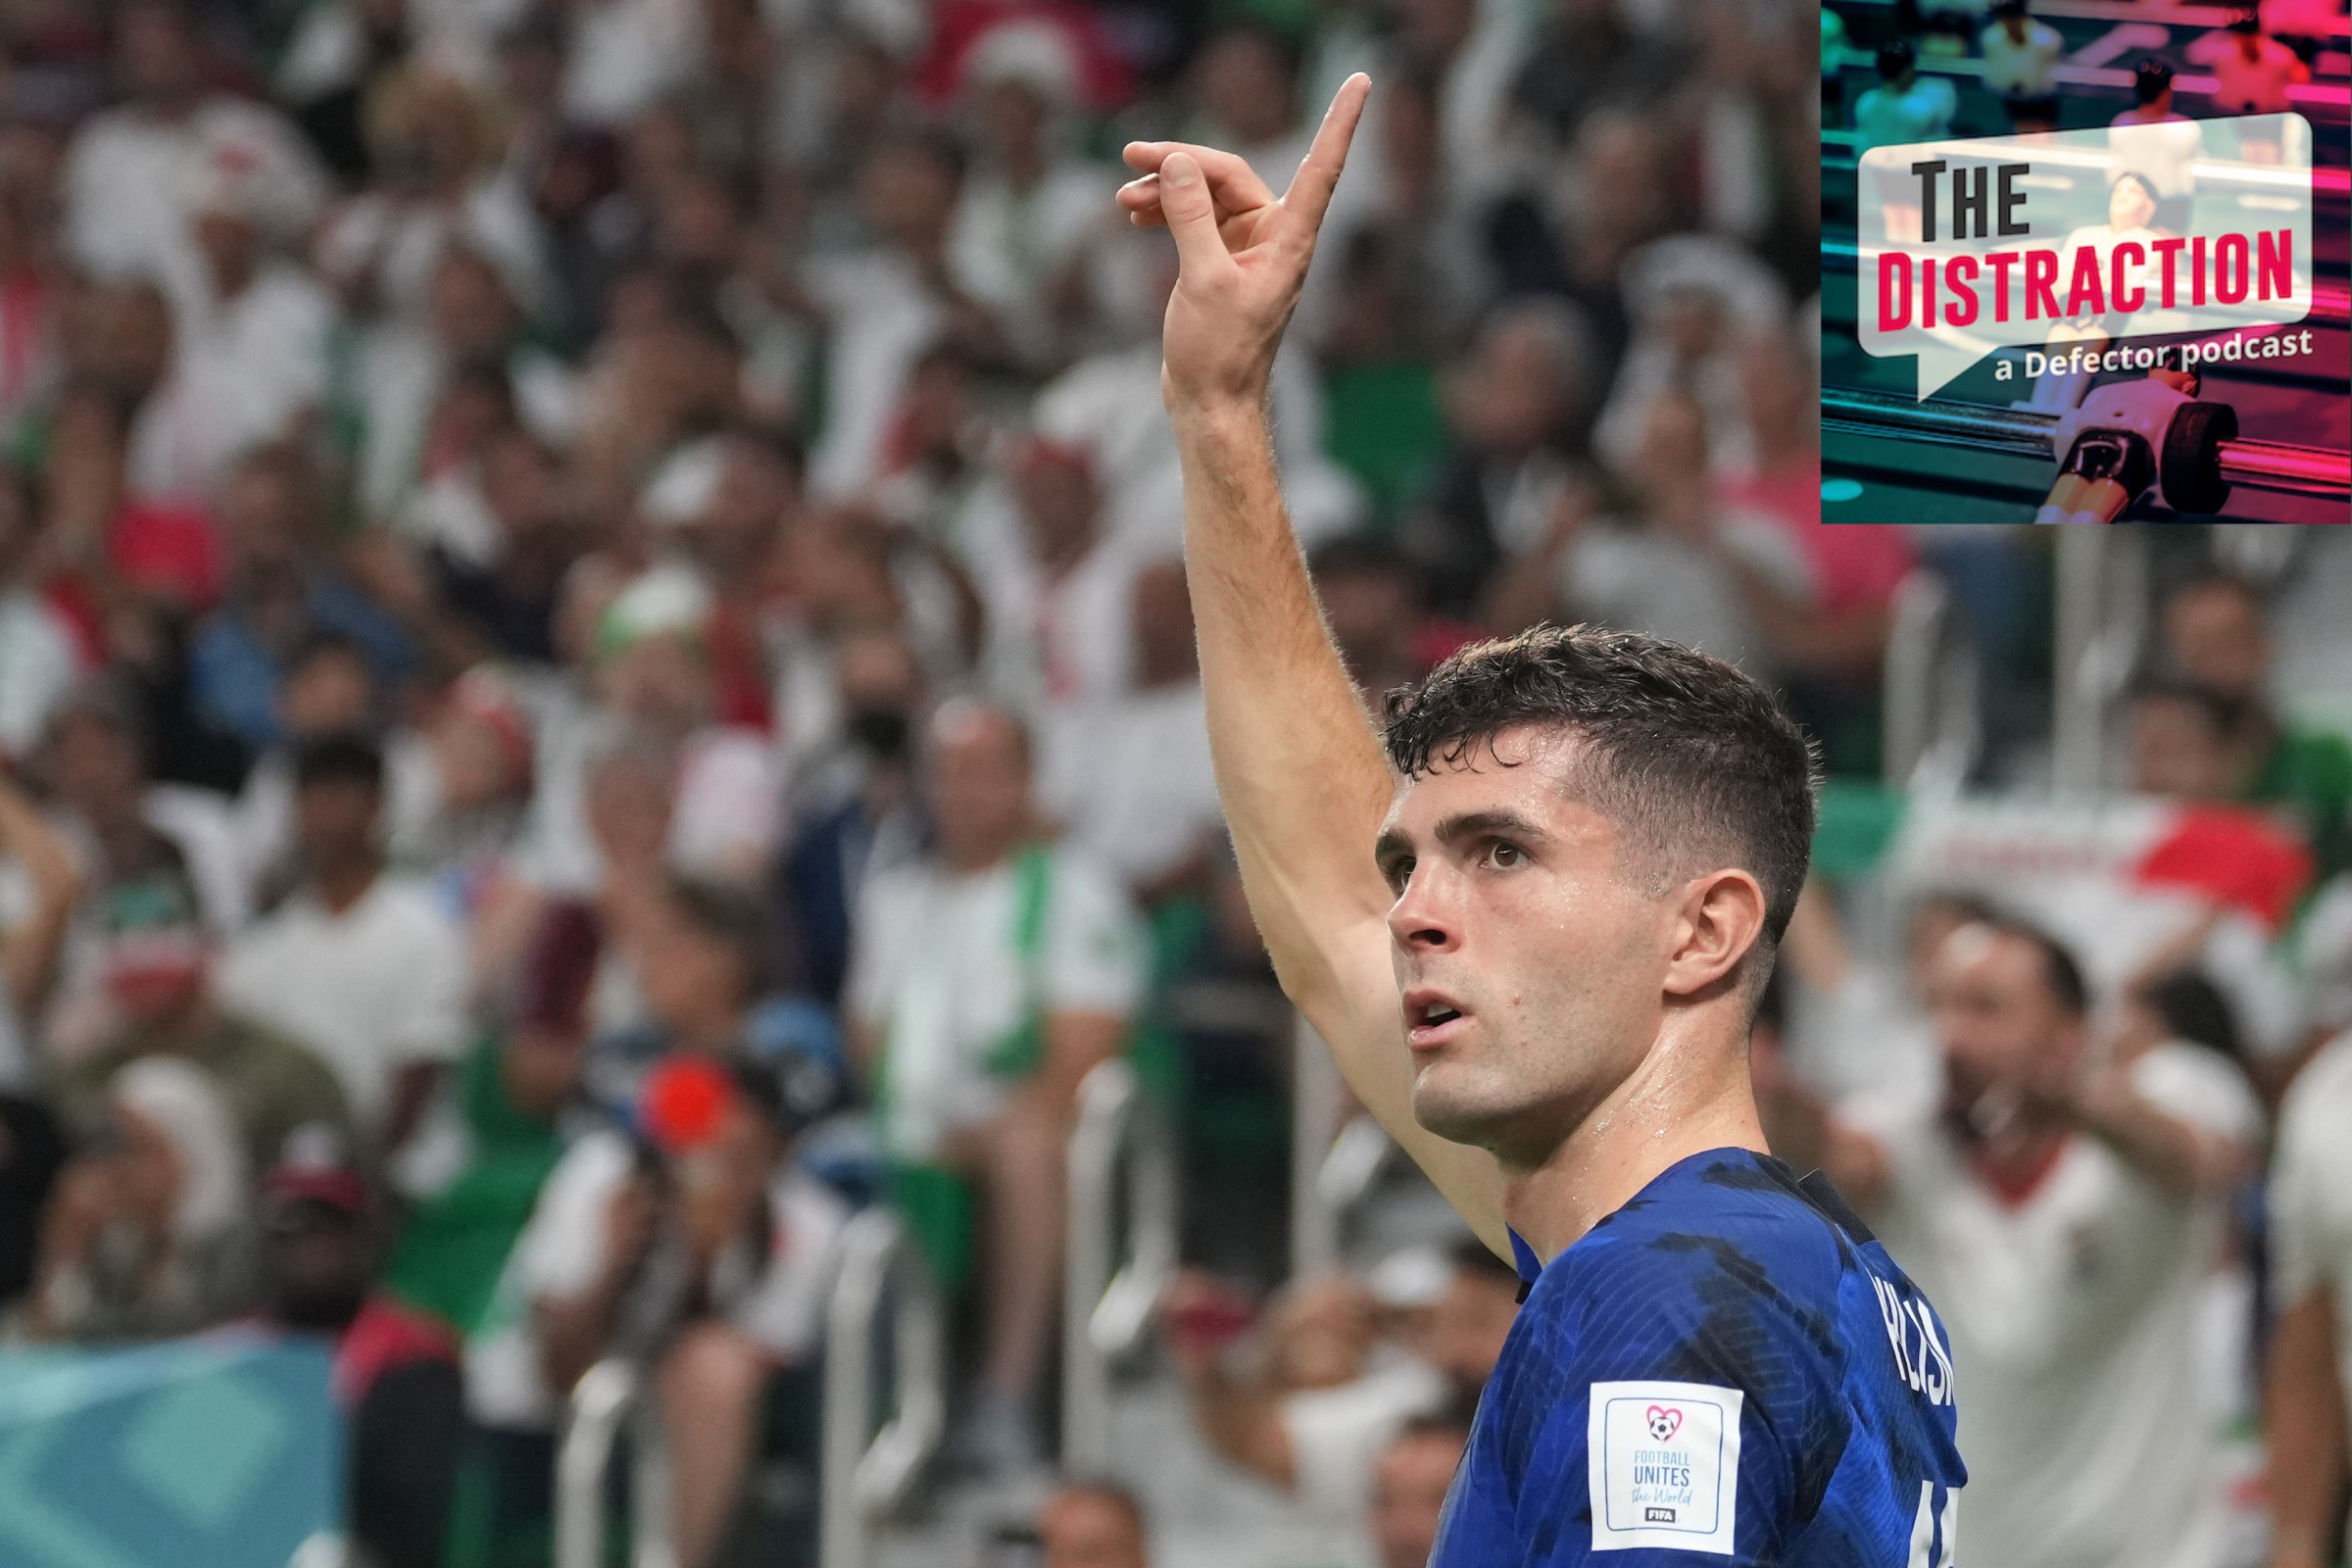 Christian Pulisic of the US Men's National Team prepares to take a corner kick in the team's win against Iran in the 2022 World Cup.